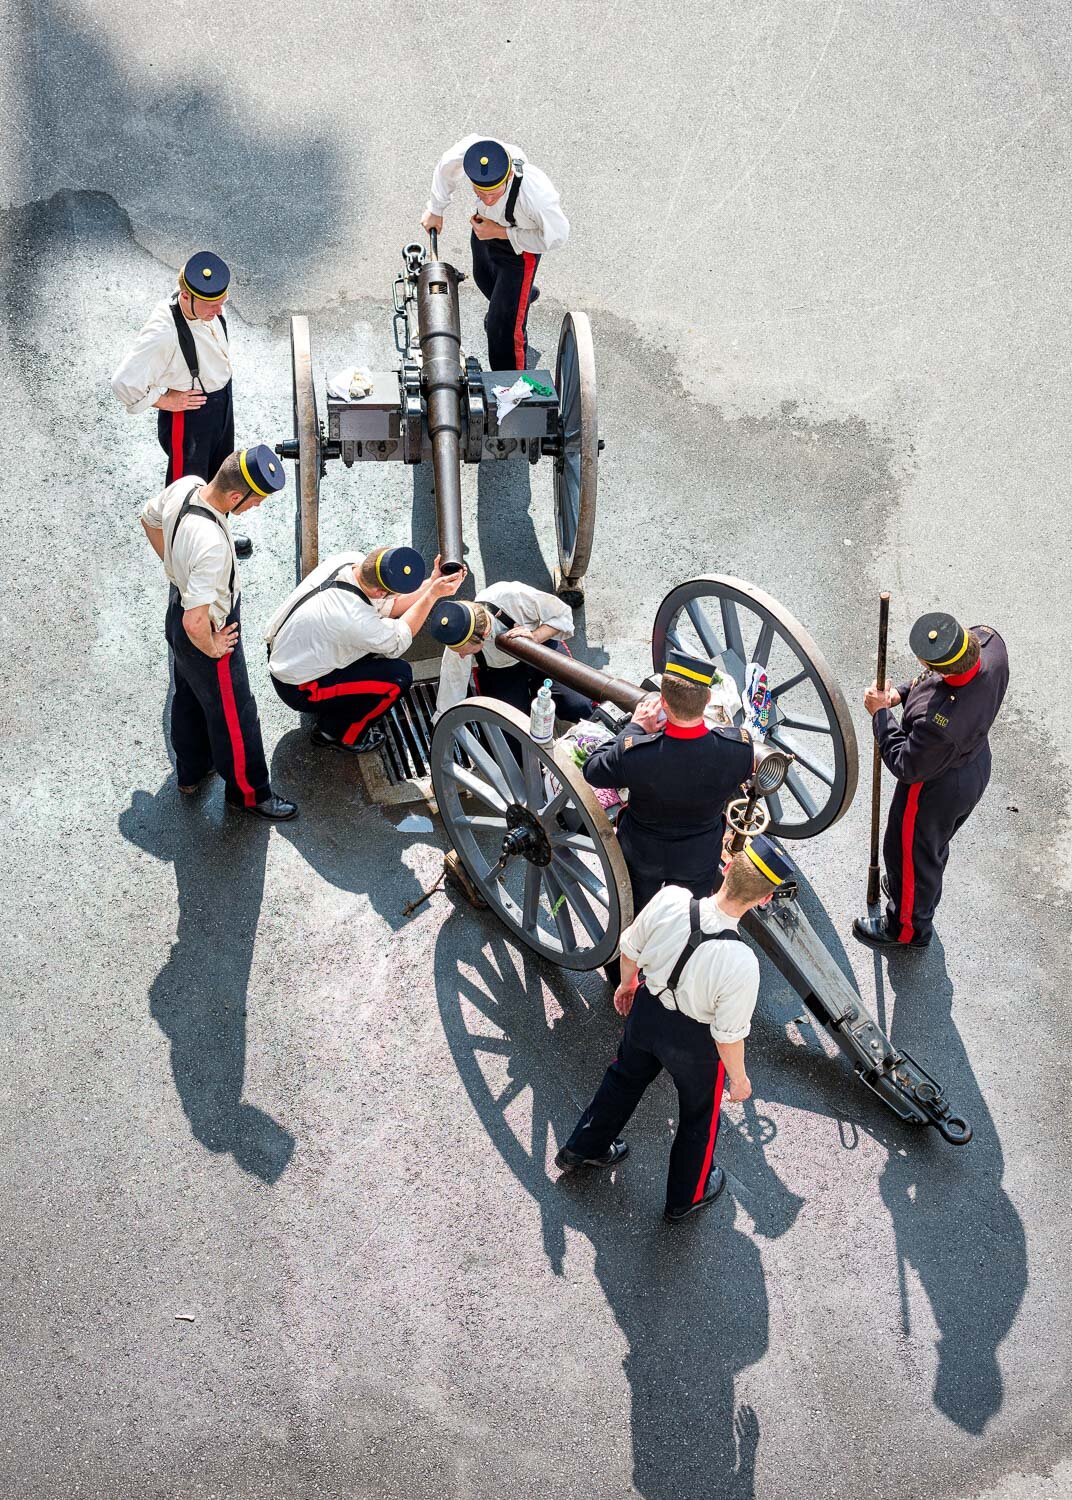 Fort Henry Guard, Kingston, Ontario, Canada